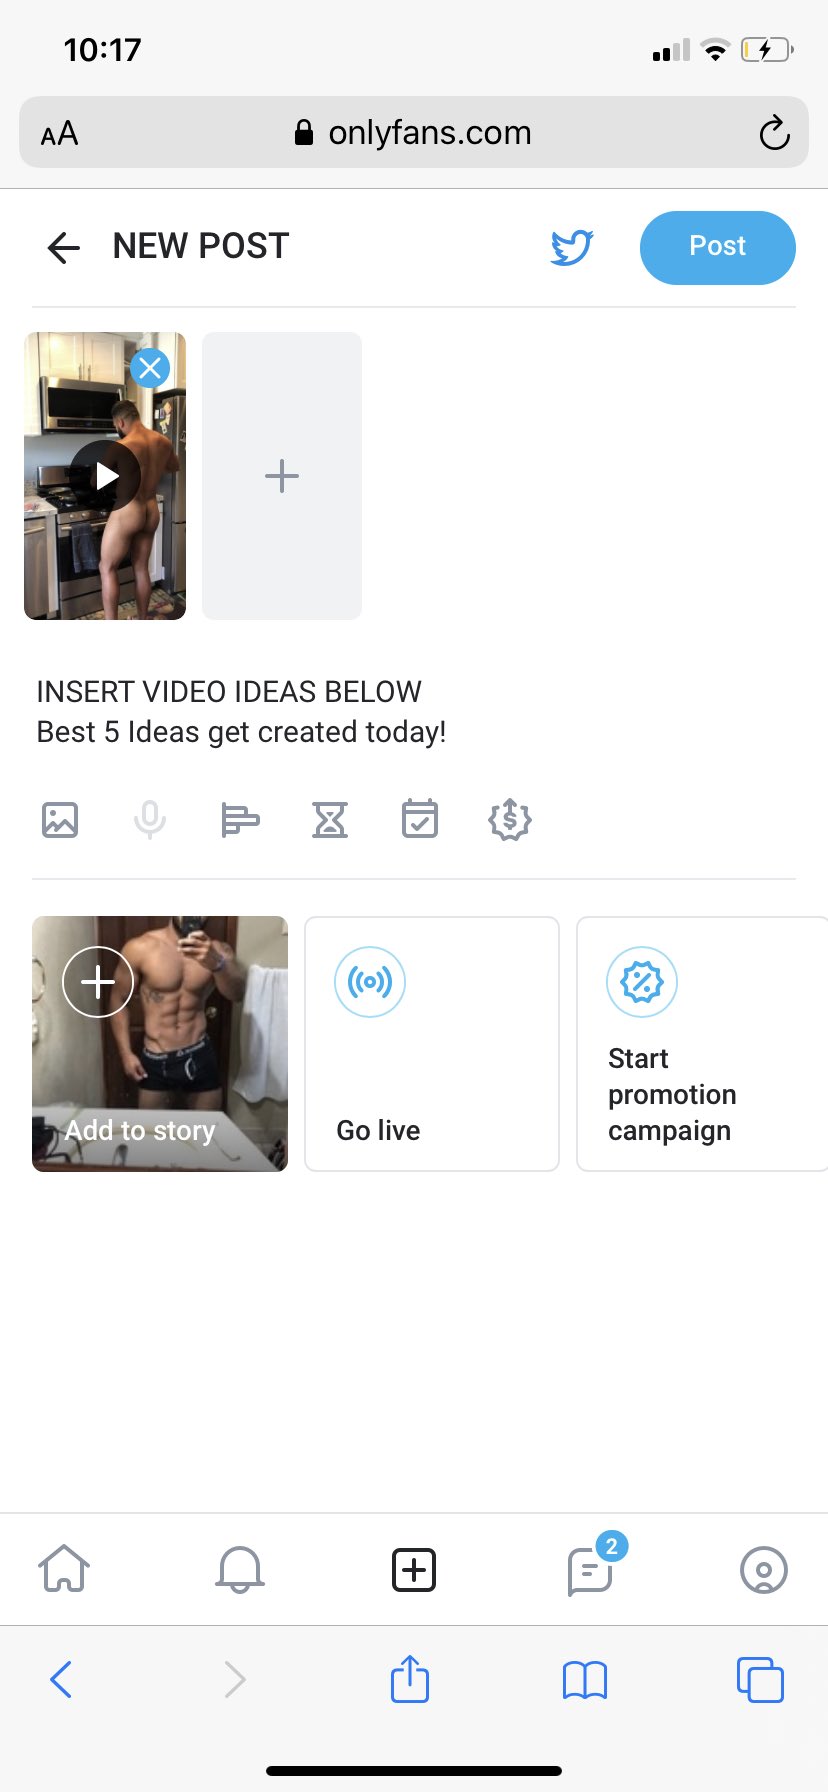 Only fans post ideas